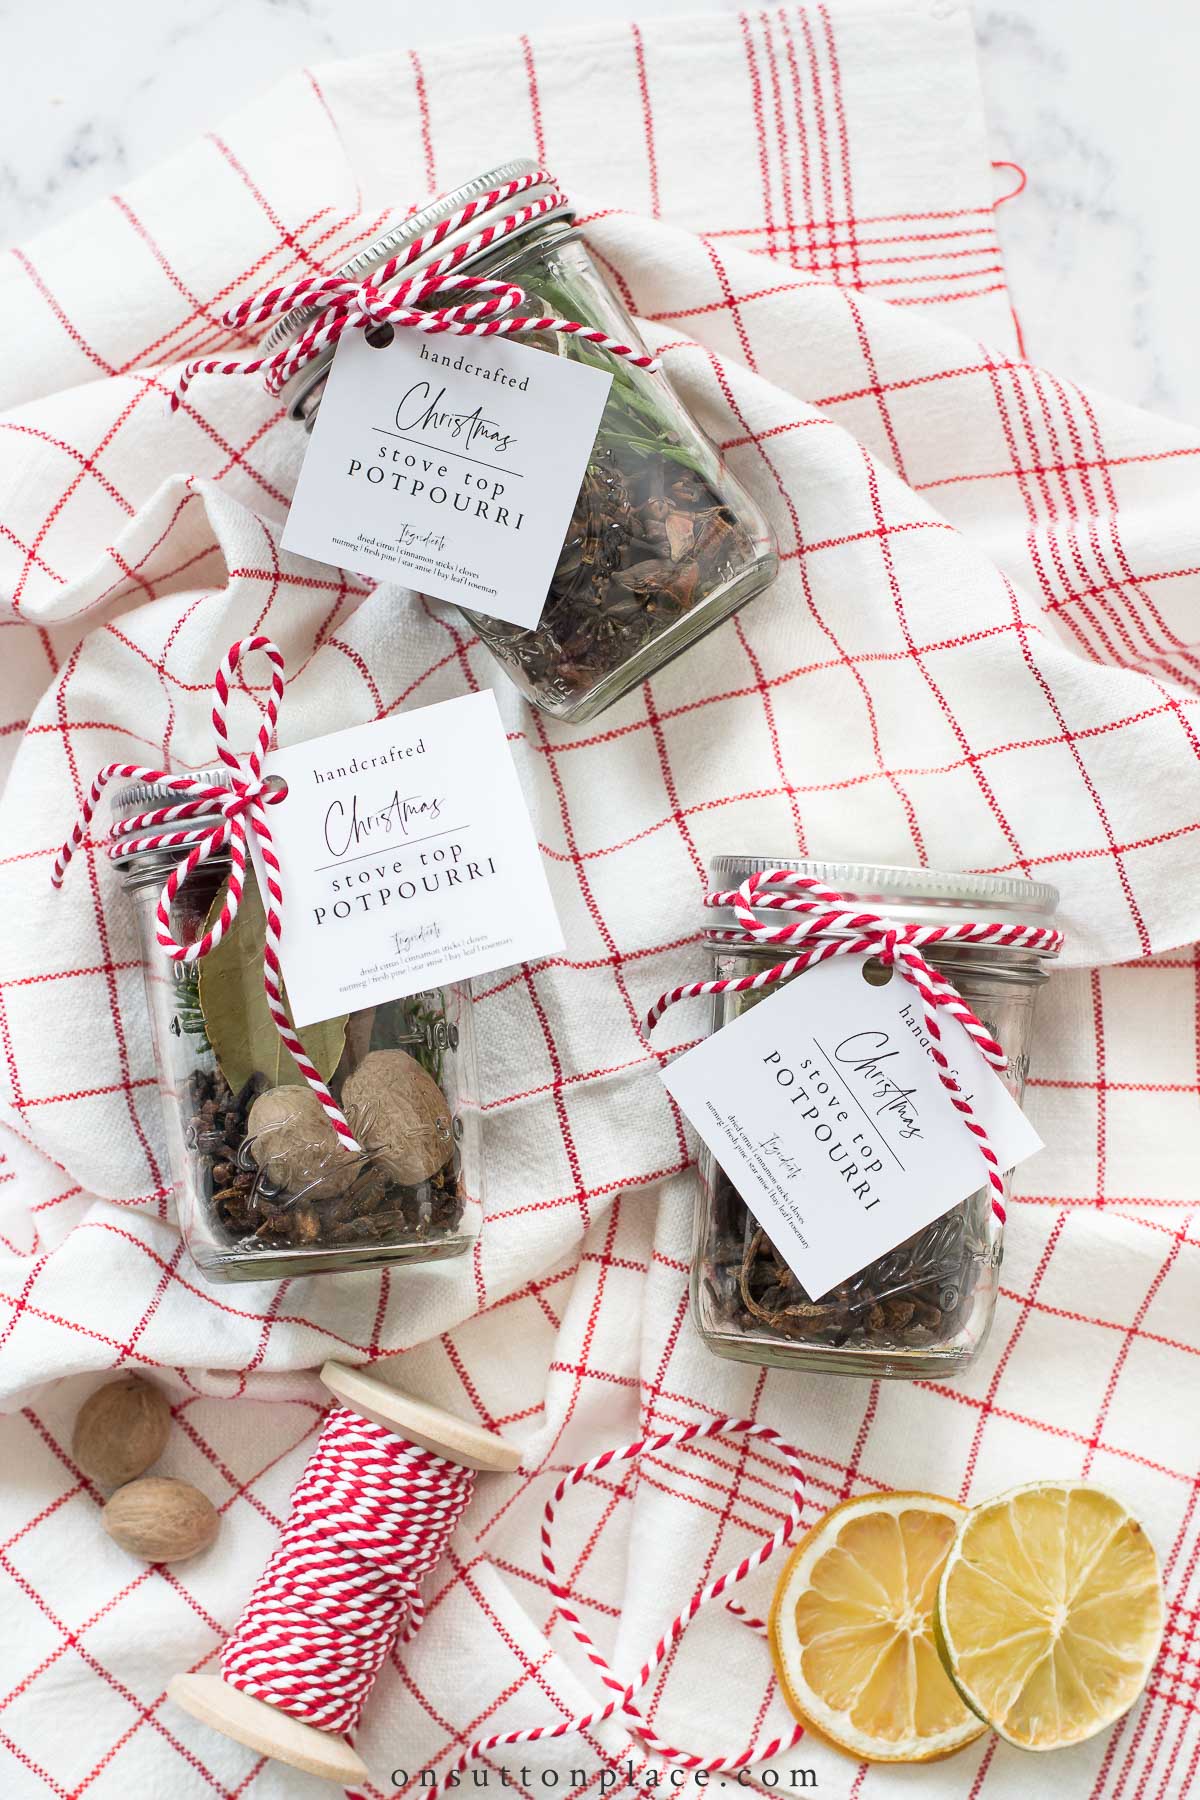 https://www.onsuttonplace.com/wp-content/uploads/2017/10/jars-of-stovetop-potpourri-with-tags.jpg